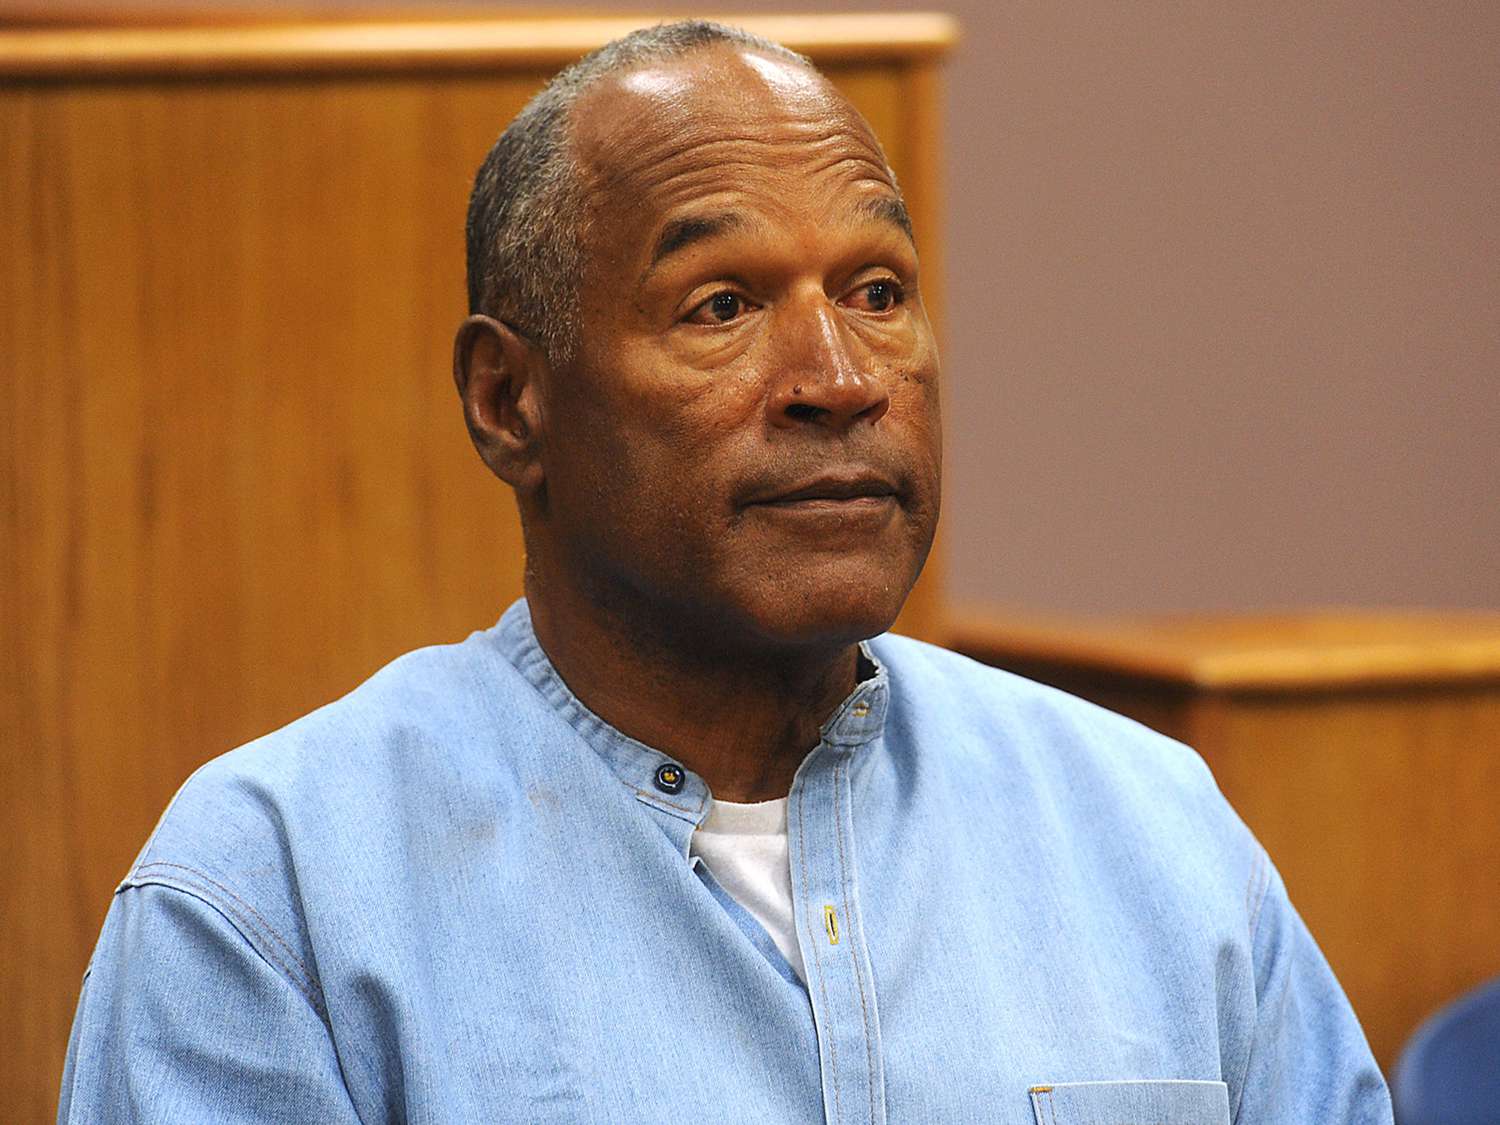 O.J. Simpson Dead at 76 From Cancer, Family Says [Video]